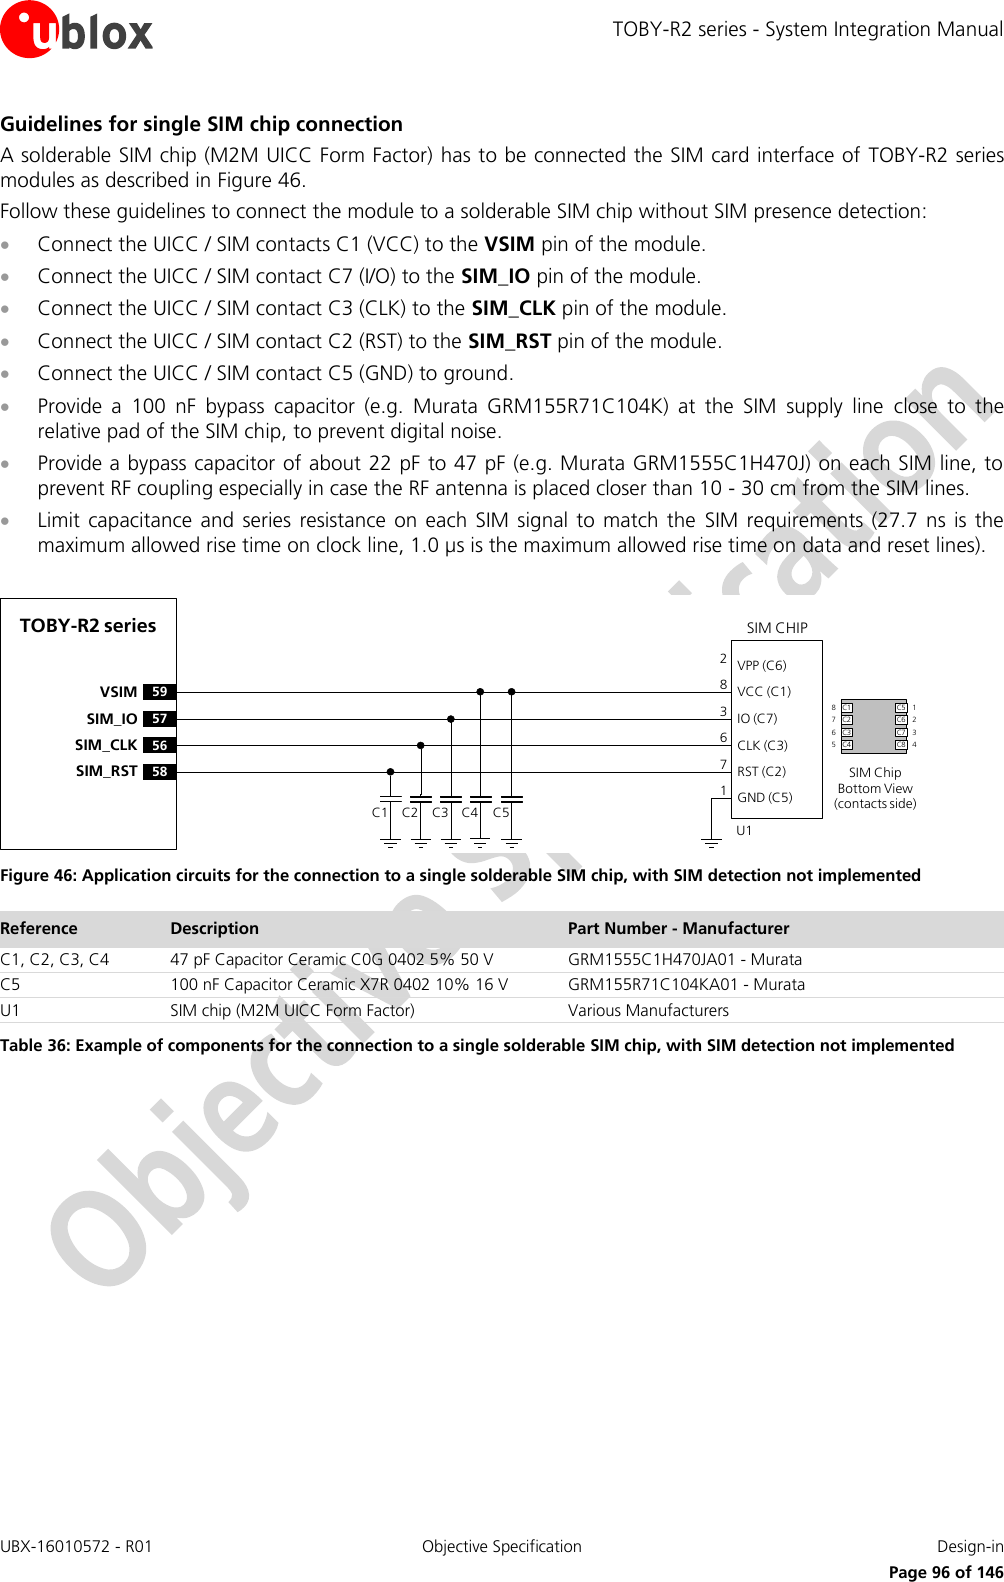 TOBY-R2 series - System Integration Manual UBX-16010572 - R01  Objective Specification  Design-in     Page 96 of 146 Guidelines for single SIM chip connection A solderable SIM chip (M2M UICC Form Factor) has to be connected the SIM card interface of TOBY-R2 series modules as described in Figure 46. Follow these guidelines to connect the module to a solderable SIM chip without SIM presence detection:  Connect the UICC / SIM contacts C1 (VCC) to the VSIM pin of the module.  Connect the UICC / SIM contact C7 (I/O) to the SIM_IO pin of the module.  Connect the UICC / SIM contact C3 (CLK) to the SIM_CLK pin of the module.  Connect the UICC / SIM contact C2 (RST) to the SIM_RST pin of the module.  Connect the UICC / SIM contact C5 (GND) to ground.  Provide  a  100  nF  bypass  capacitor  (e.g.  Murata  GRM155R71C104K)  at  the  SIM  supply  line  close  to  the relative pad of the SIM chip, to prevent digital noise.   Provide a bypass capacitor of about 22 pF to 47 pF (e.g. Murata GRM1555C1H470J) on each SIM line, to prevent RF coupling especially in case the RF antenna is placed closer than 10 - 30 cm from the SIM lines.  Limit capacitance  and  series resistance  on each  SIM  signal to  match the  SIM  requirements  (27.7  ns is the maximum allowed rise time on clock line, 1.0 µs is the maximum allowed rise time on data and reset lines).  TOBY-R2 series59VSIM57SIM_IO56SIM_CLK58SIM_RSTSIM CHIPSIM ChipBottom View (contacts side)C1VPP (C6)VCC (C1)IO (C7)CLK (C3)RST (C2)GND (C5)C2 C3 C5U1C4283671C1 C5C2 C6C3 C7C4 C887651234 Figure 46: Application circuits for the connection to a single solderable SIM chip, with SIM detection not implemented Reference Description Part Number - Manufacturer C1, C2, C3, C4 47 pF Capacitor Ceramic C0G 0402 5% 50 V GRM1555C1H470JA01 - Murata C5 100 nF Capacitor Ceramic X7R 0402 10% 16 V GRM155R71C104KA01 - Murata U1 SIM chip (M2M UICC Form Factor) Various Manufacturers Table 36: Example of components for the connection to a single solderable SIM chip, with SIM detection not implemented   